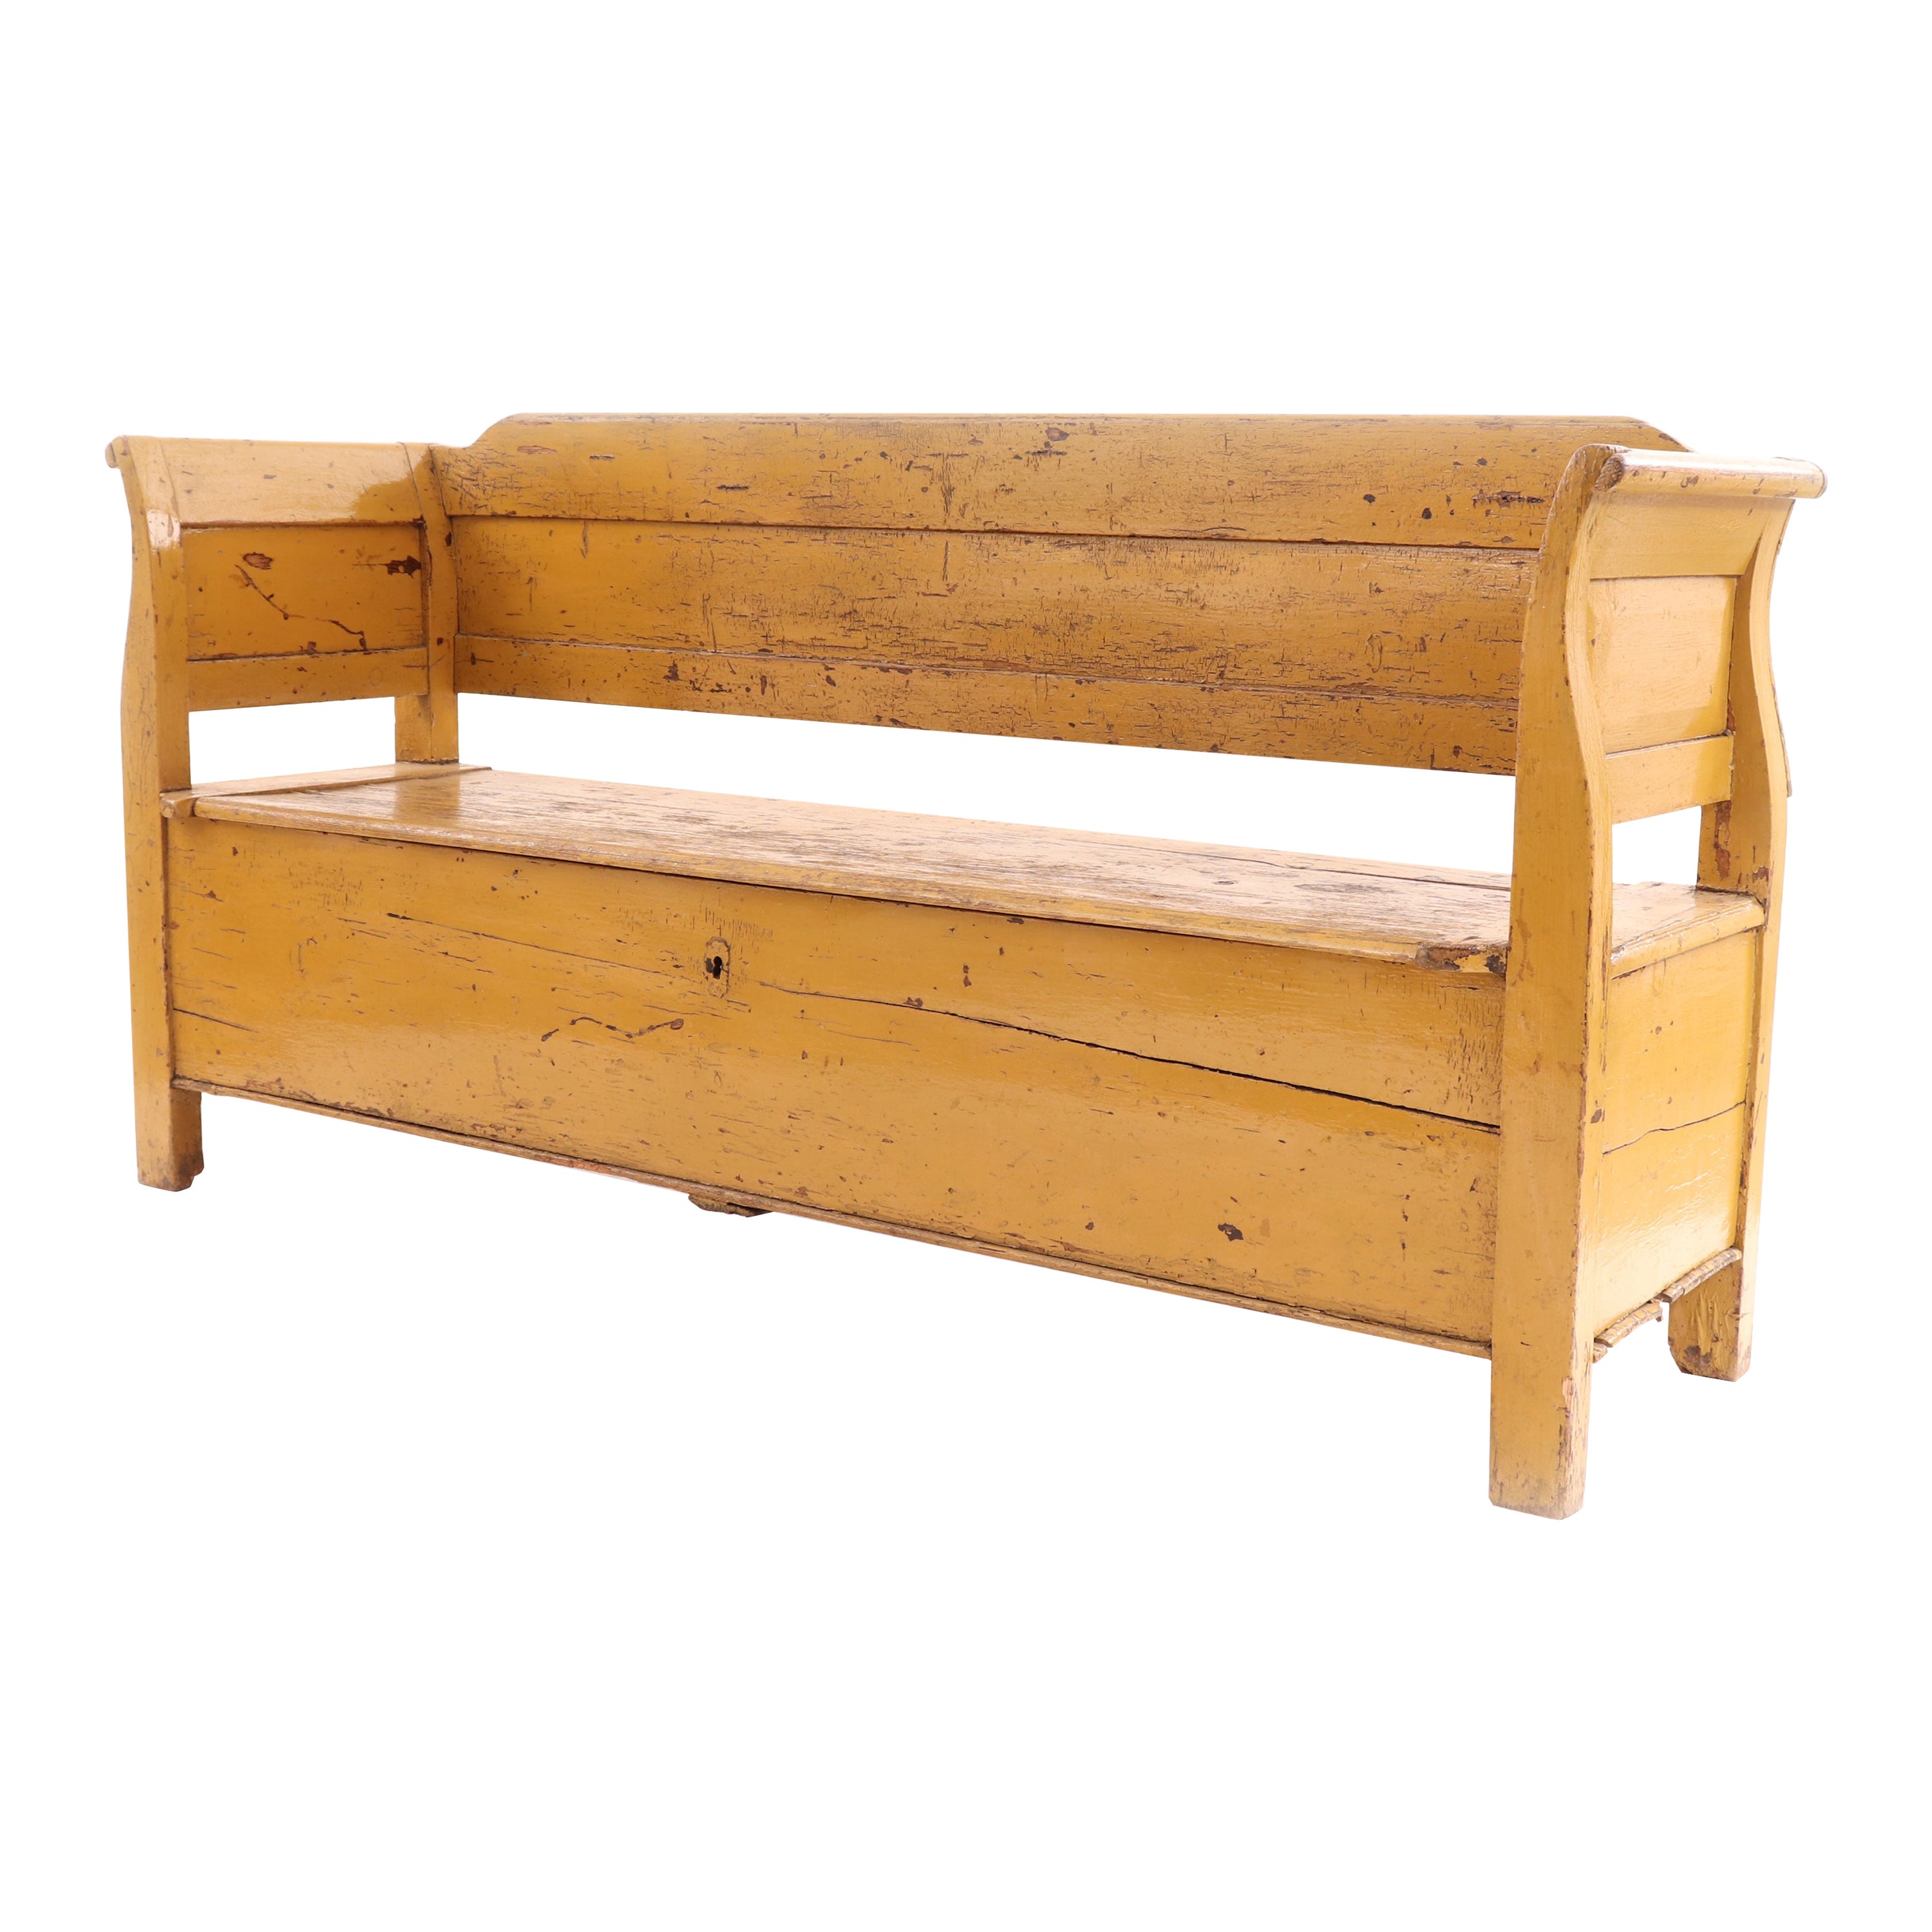 19th Century Rustic Canadian Yellow Wooden Bench For Sale